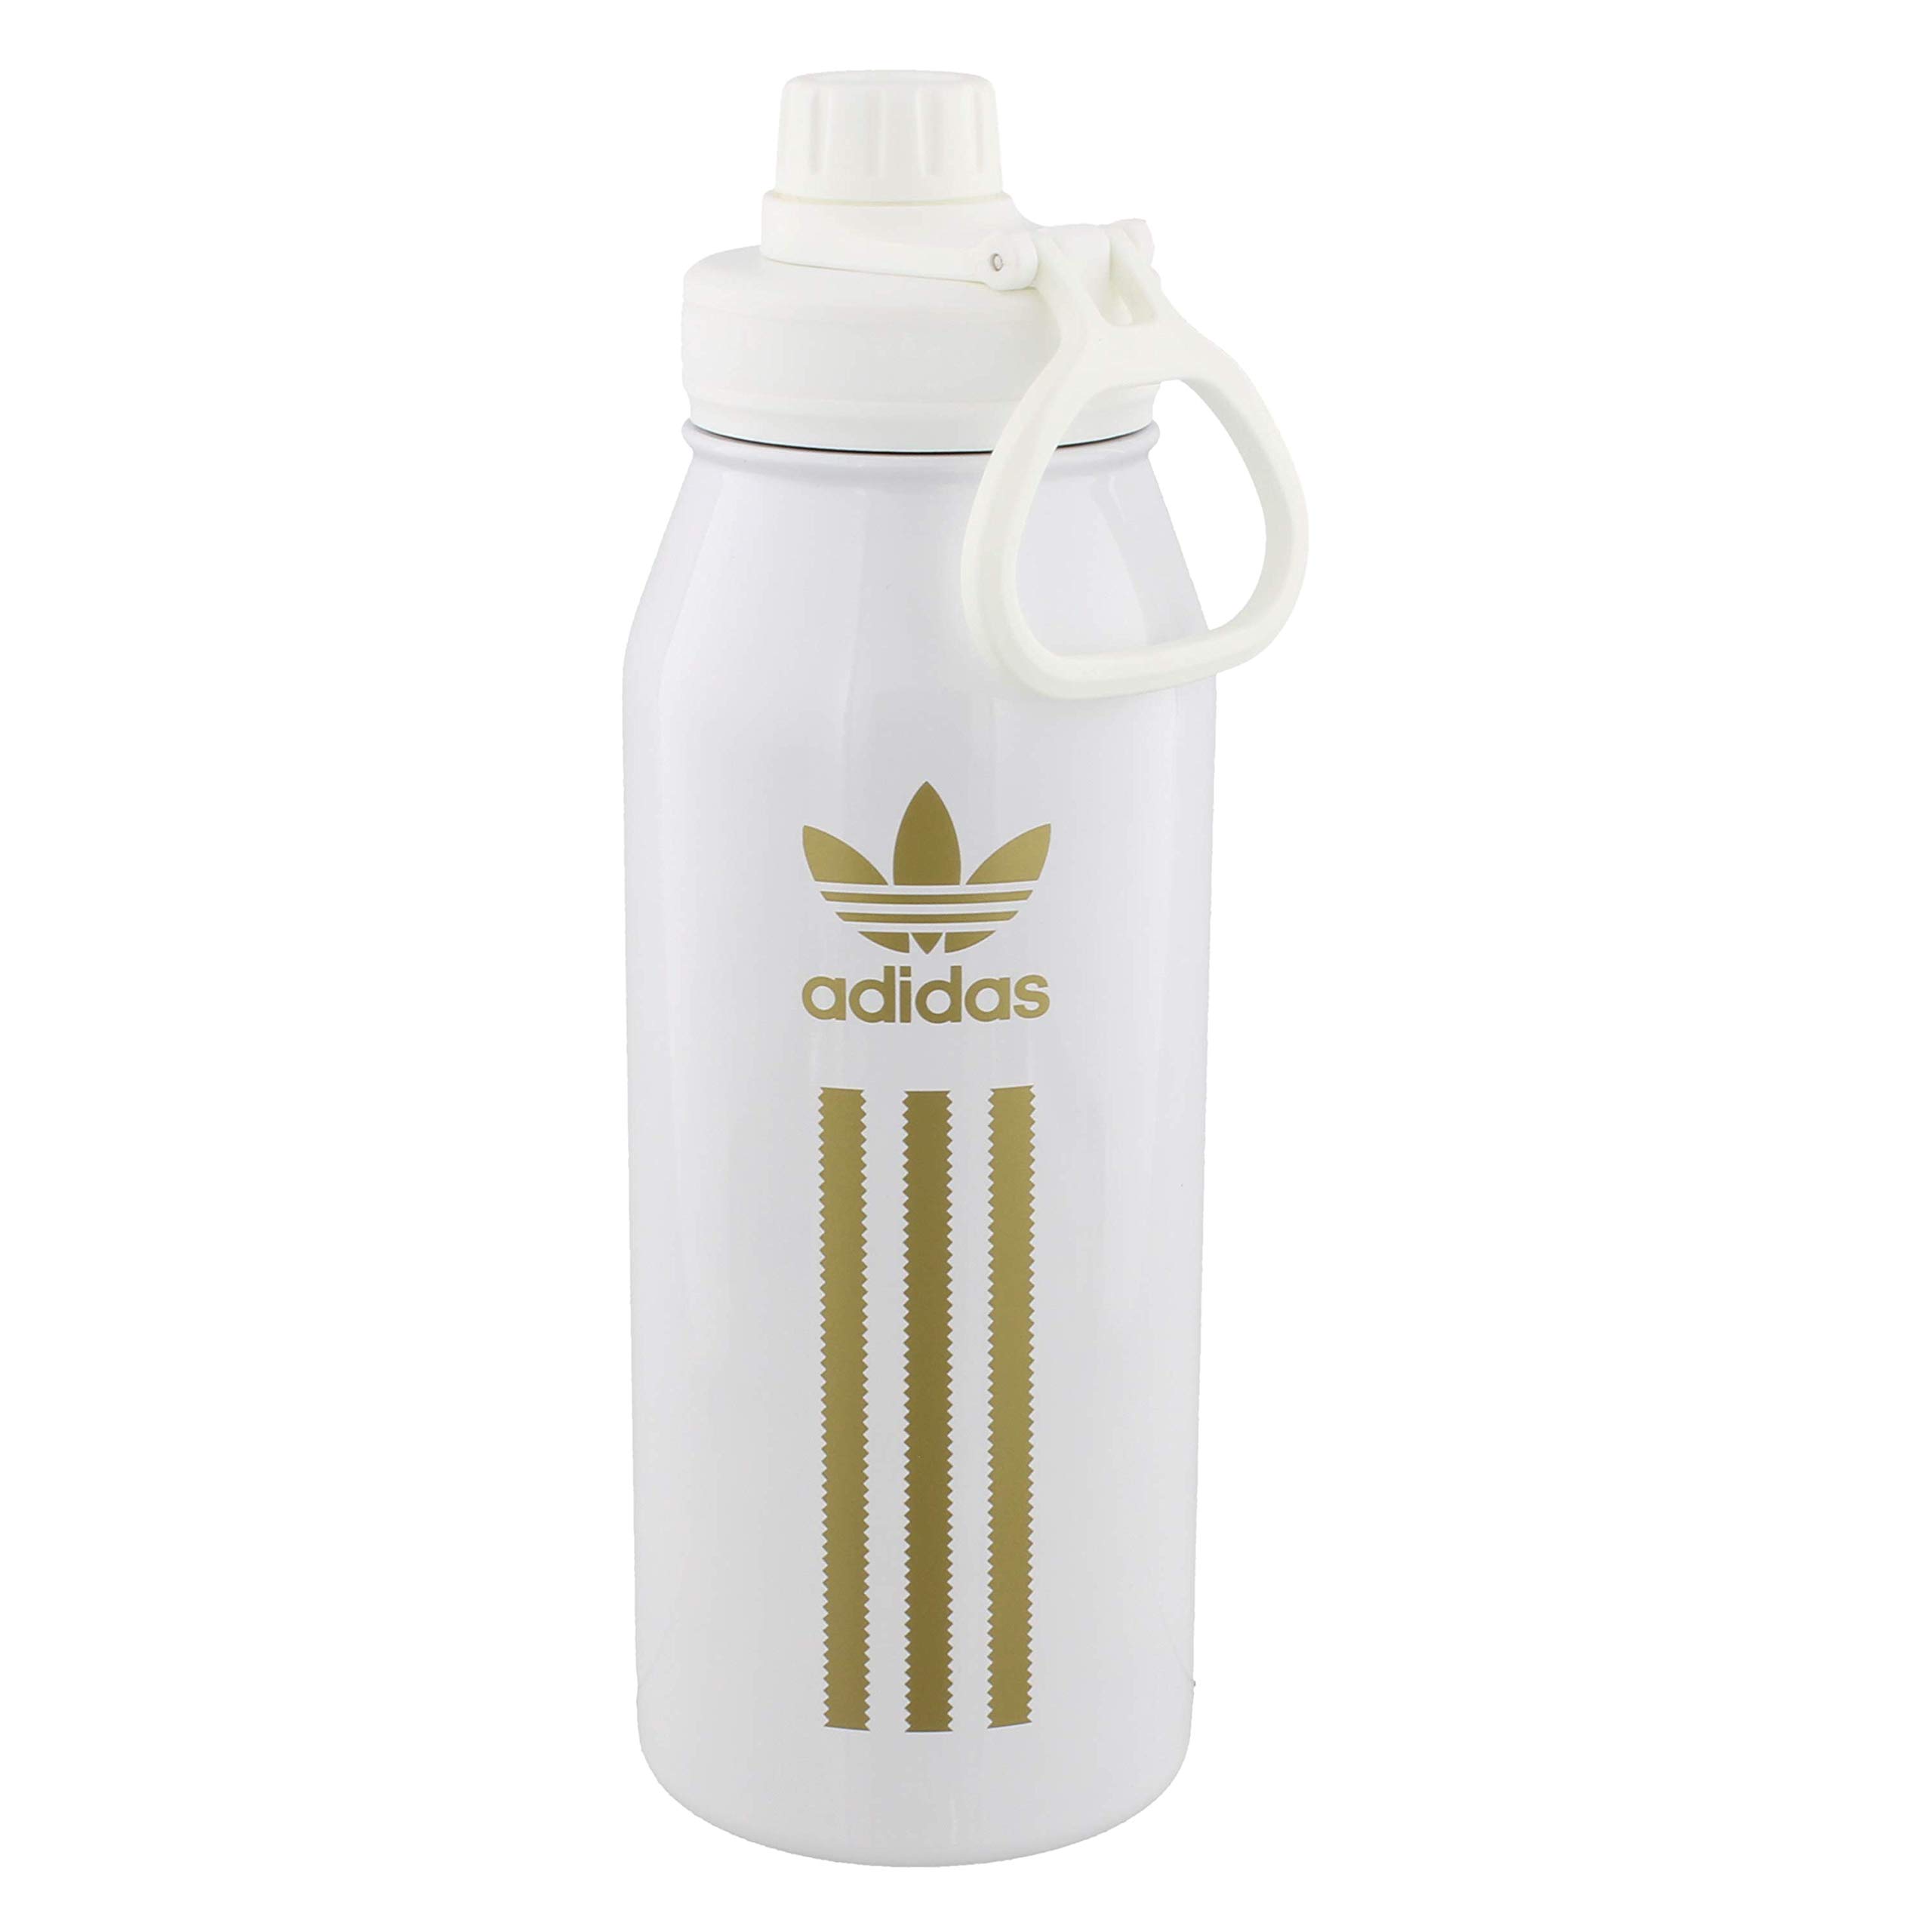 Adidas original 1 liter (32 0z.) Metal Water Bottle Hot/Cold Double Wall